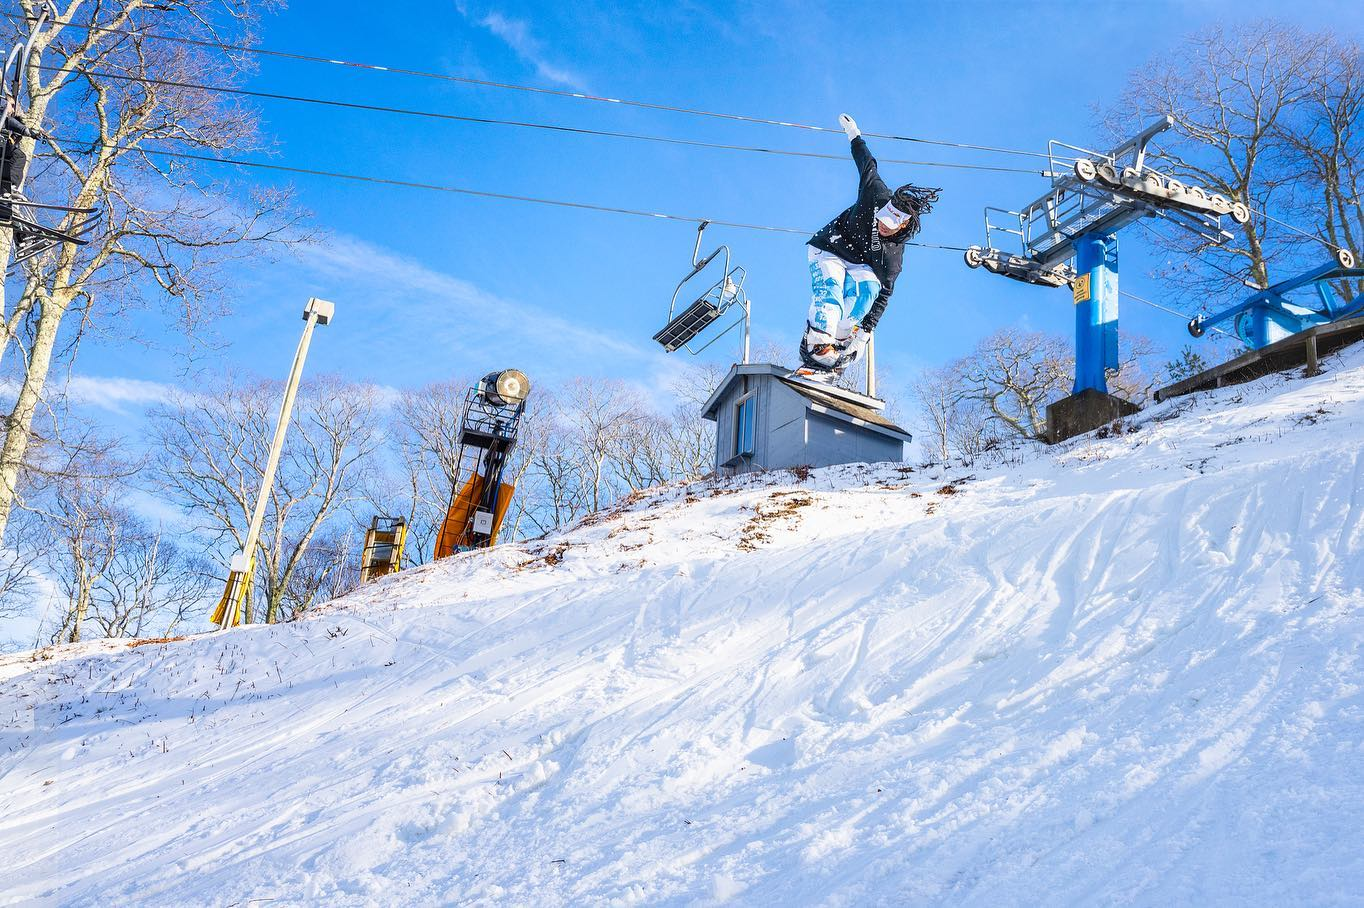 Hit the slopes at Alpine Valley Resort · East Troy Area Chamber of Commerce